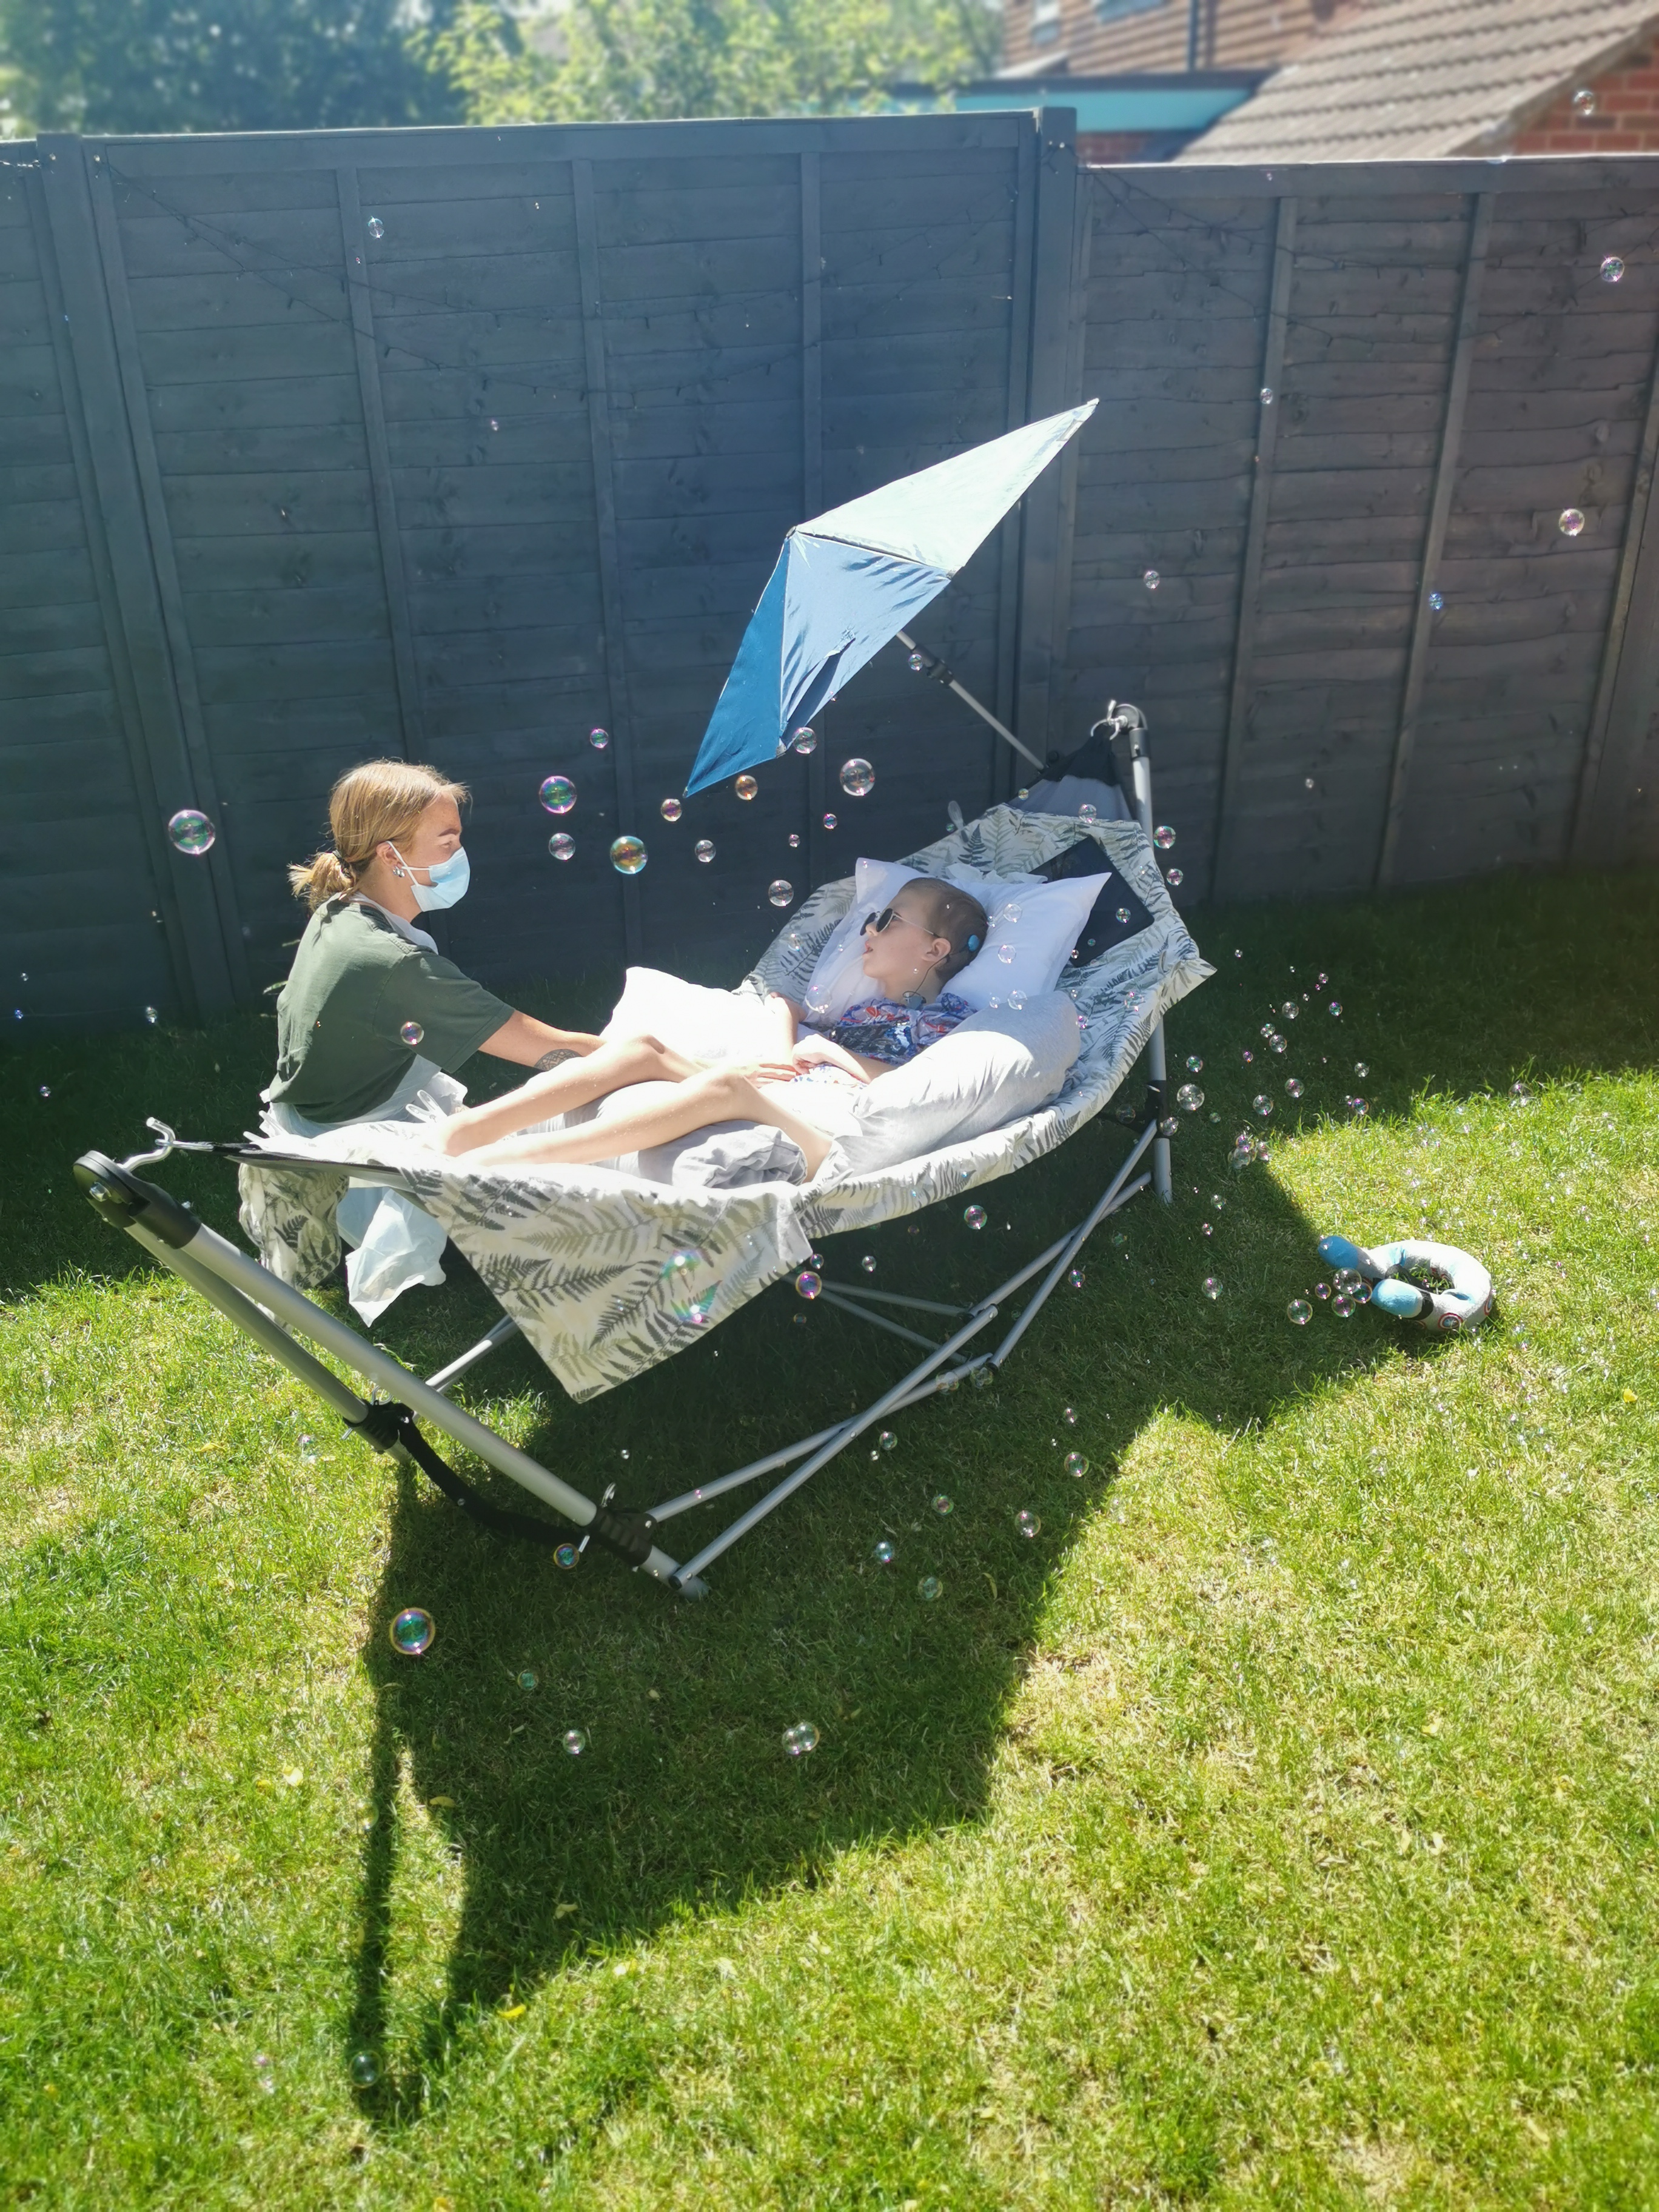 A health care assistant administering care to a young boy, who is enjoying the sunshine in his garden.